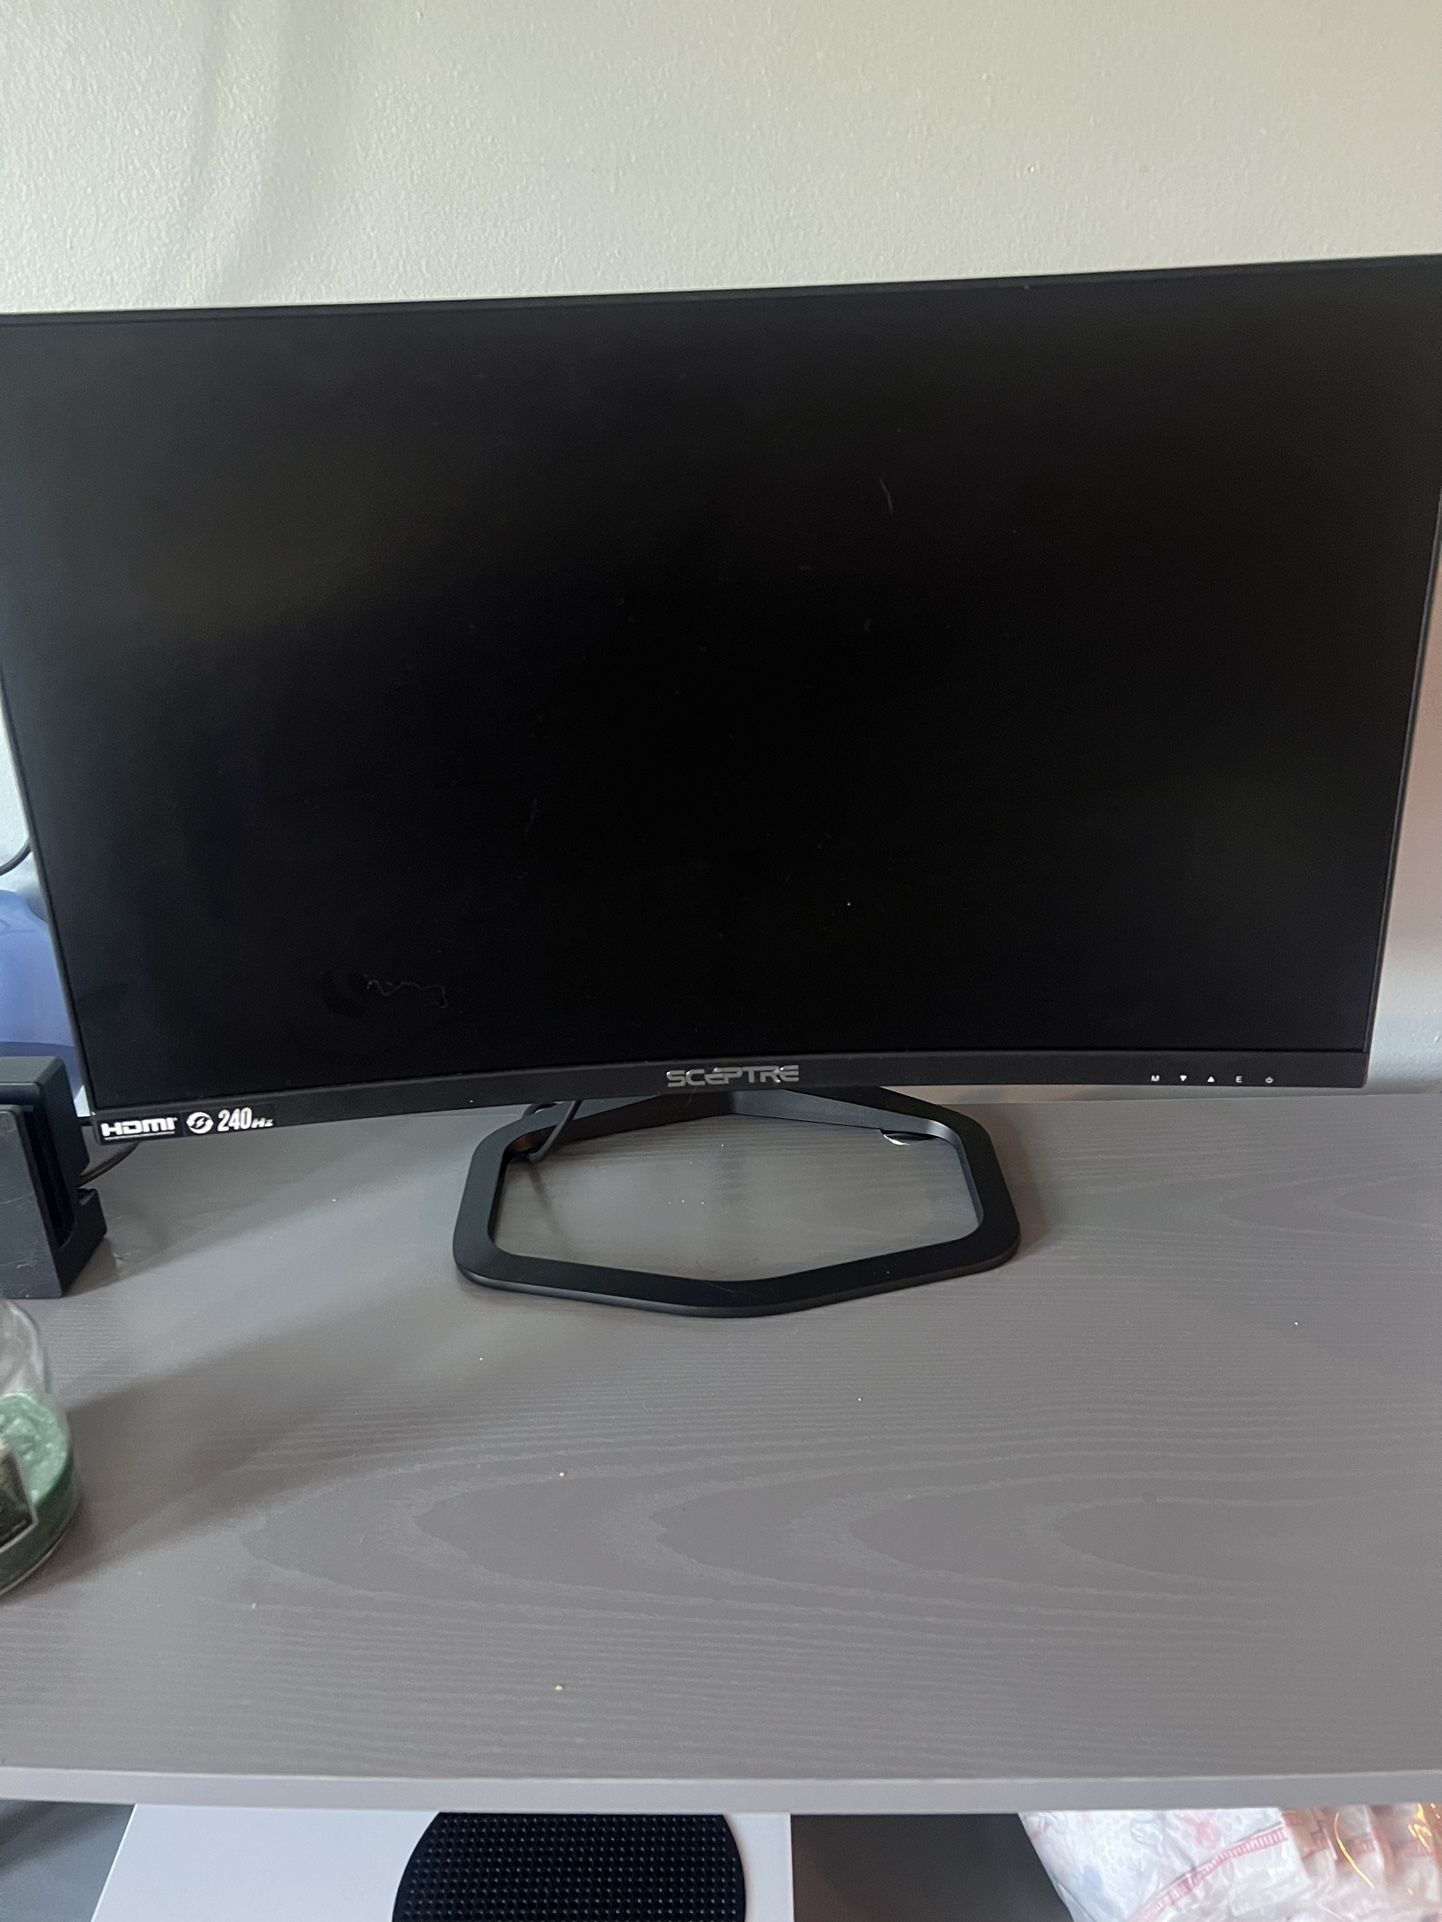 24.5” Curved Monitor